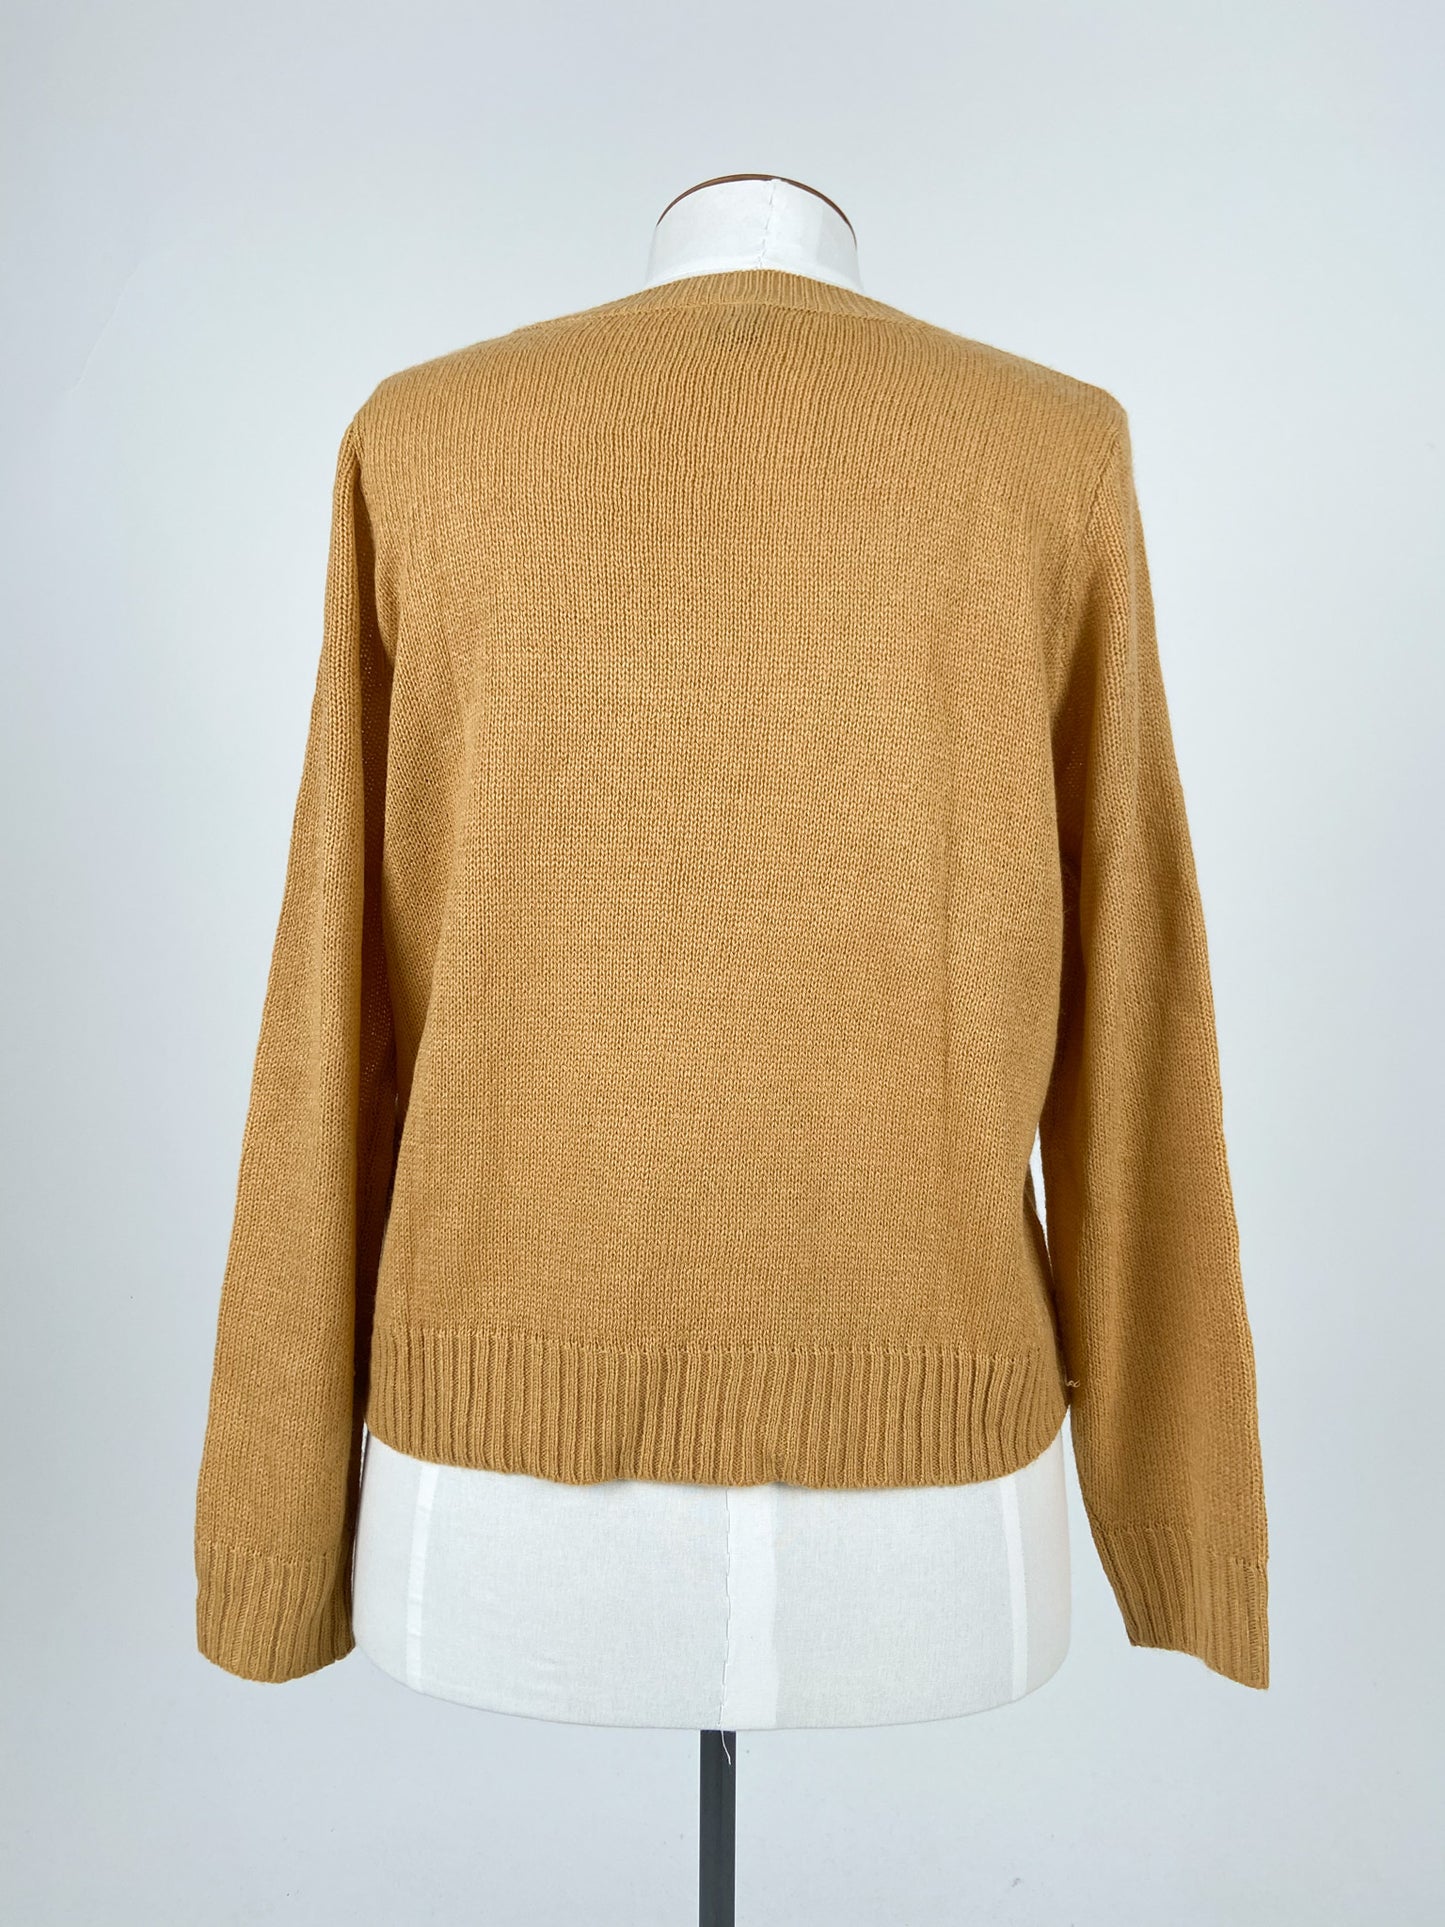 H&M | Brown Casual Jumper | Size M